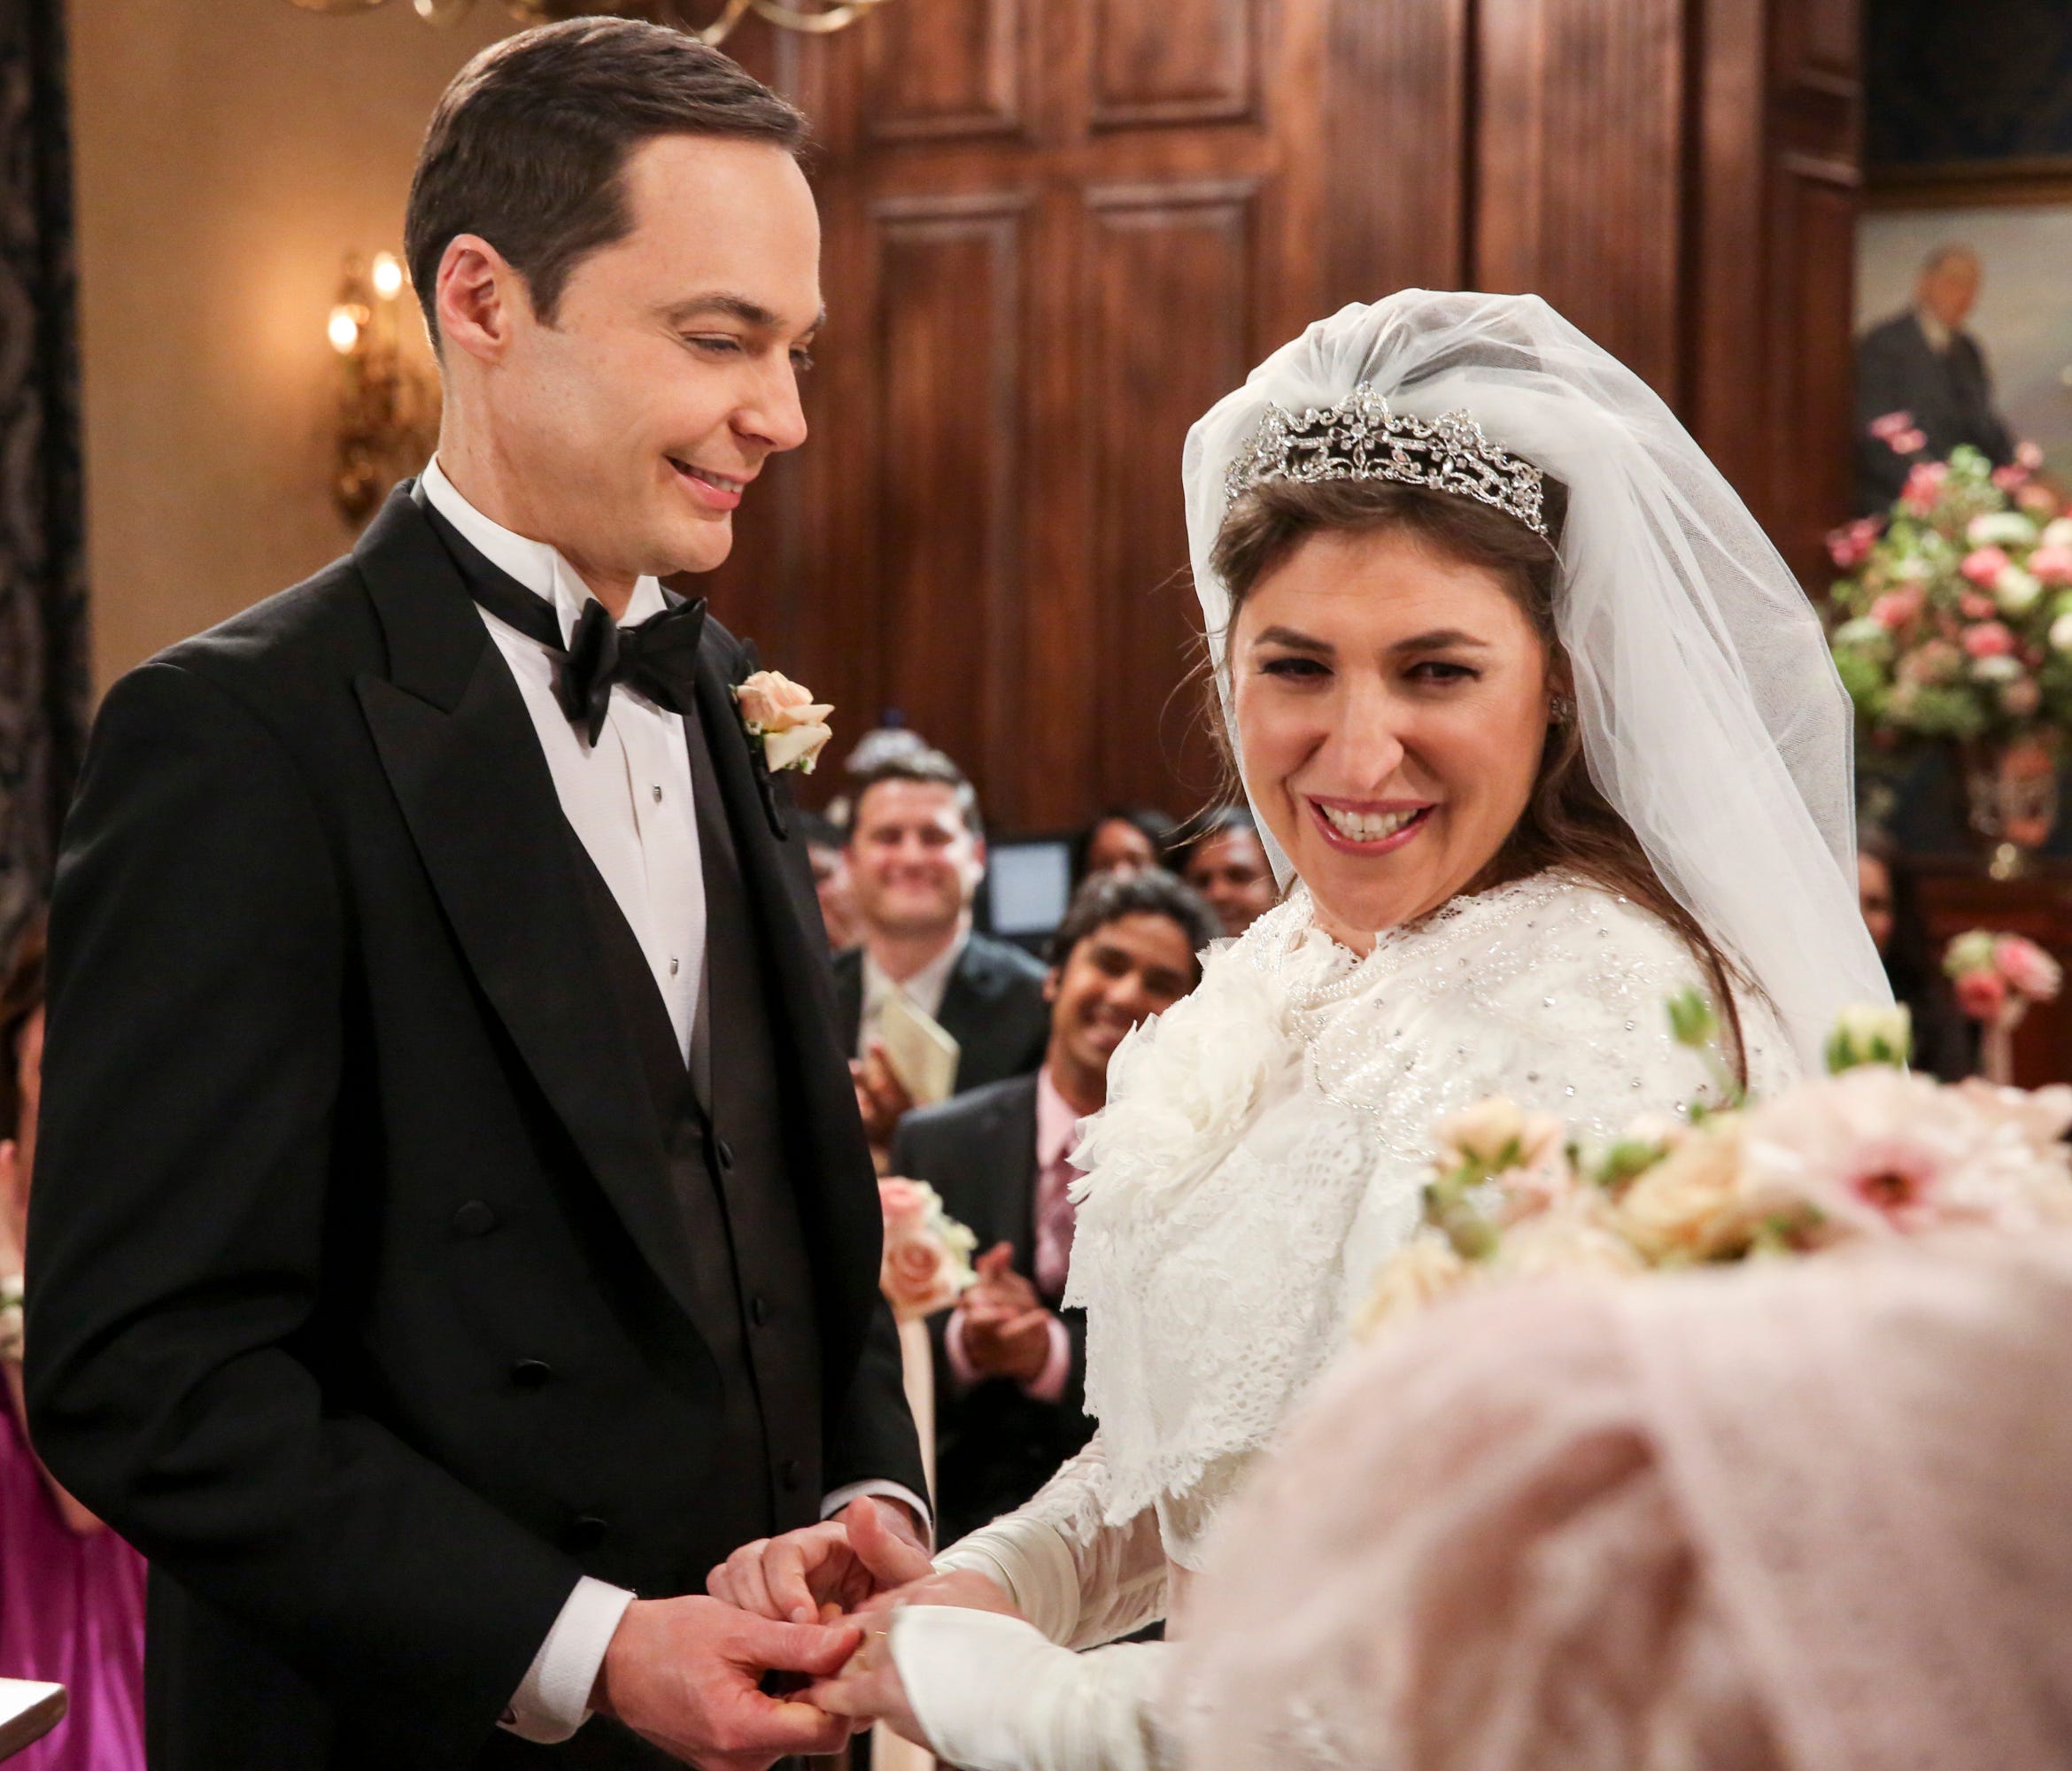 Eight years after their first date at a coffee shop, Sheldon (Jim Parsons), left, and Amy (Mayim Bialik) got married in Thursday's Season 11 finale of 'The Big Bang Theory.'